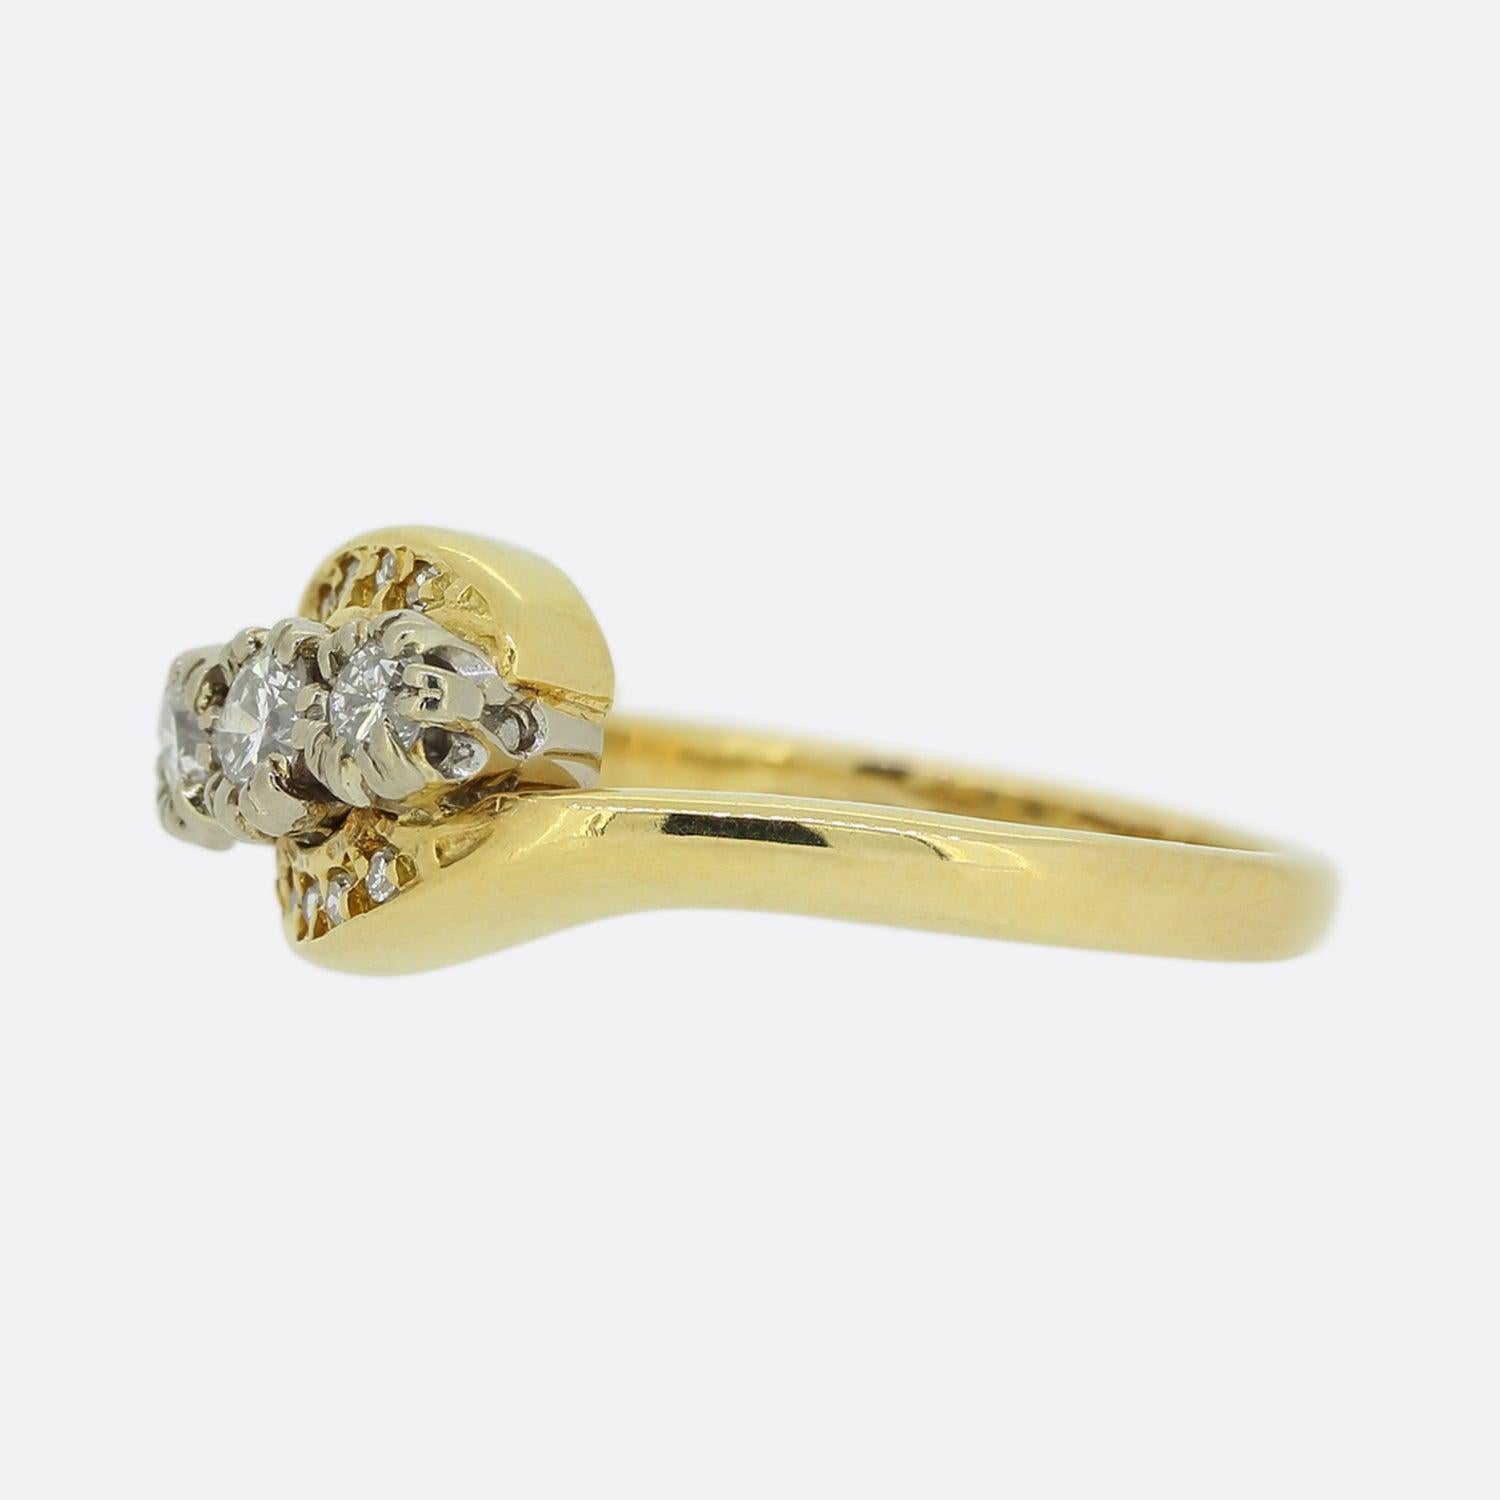 This is a vintage three stone diamond ring. Crafted from 18ct yellow gold, this piece showcases three diagonally claw set round brilliant cut diamonds. These focal stones sit slightly risen upon a swirling face where we find an additional eight